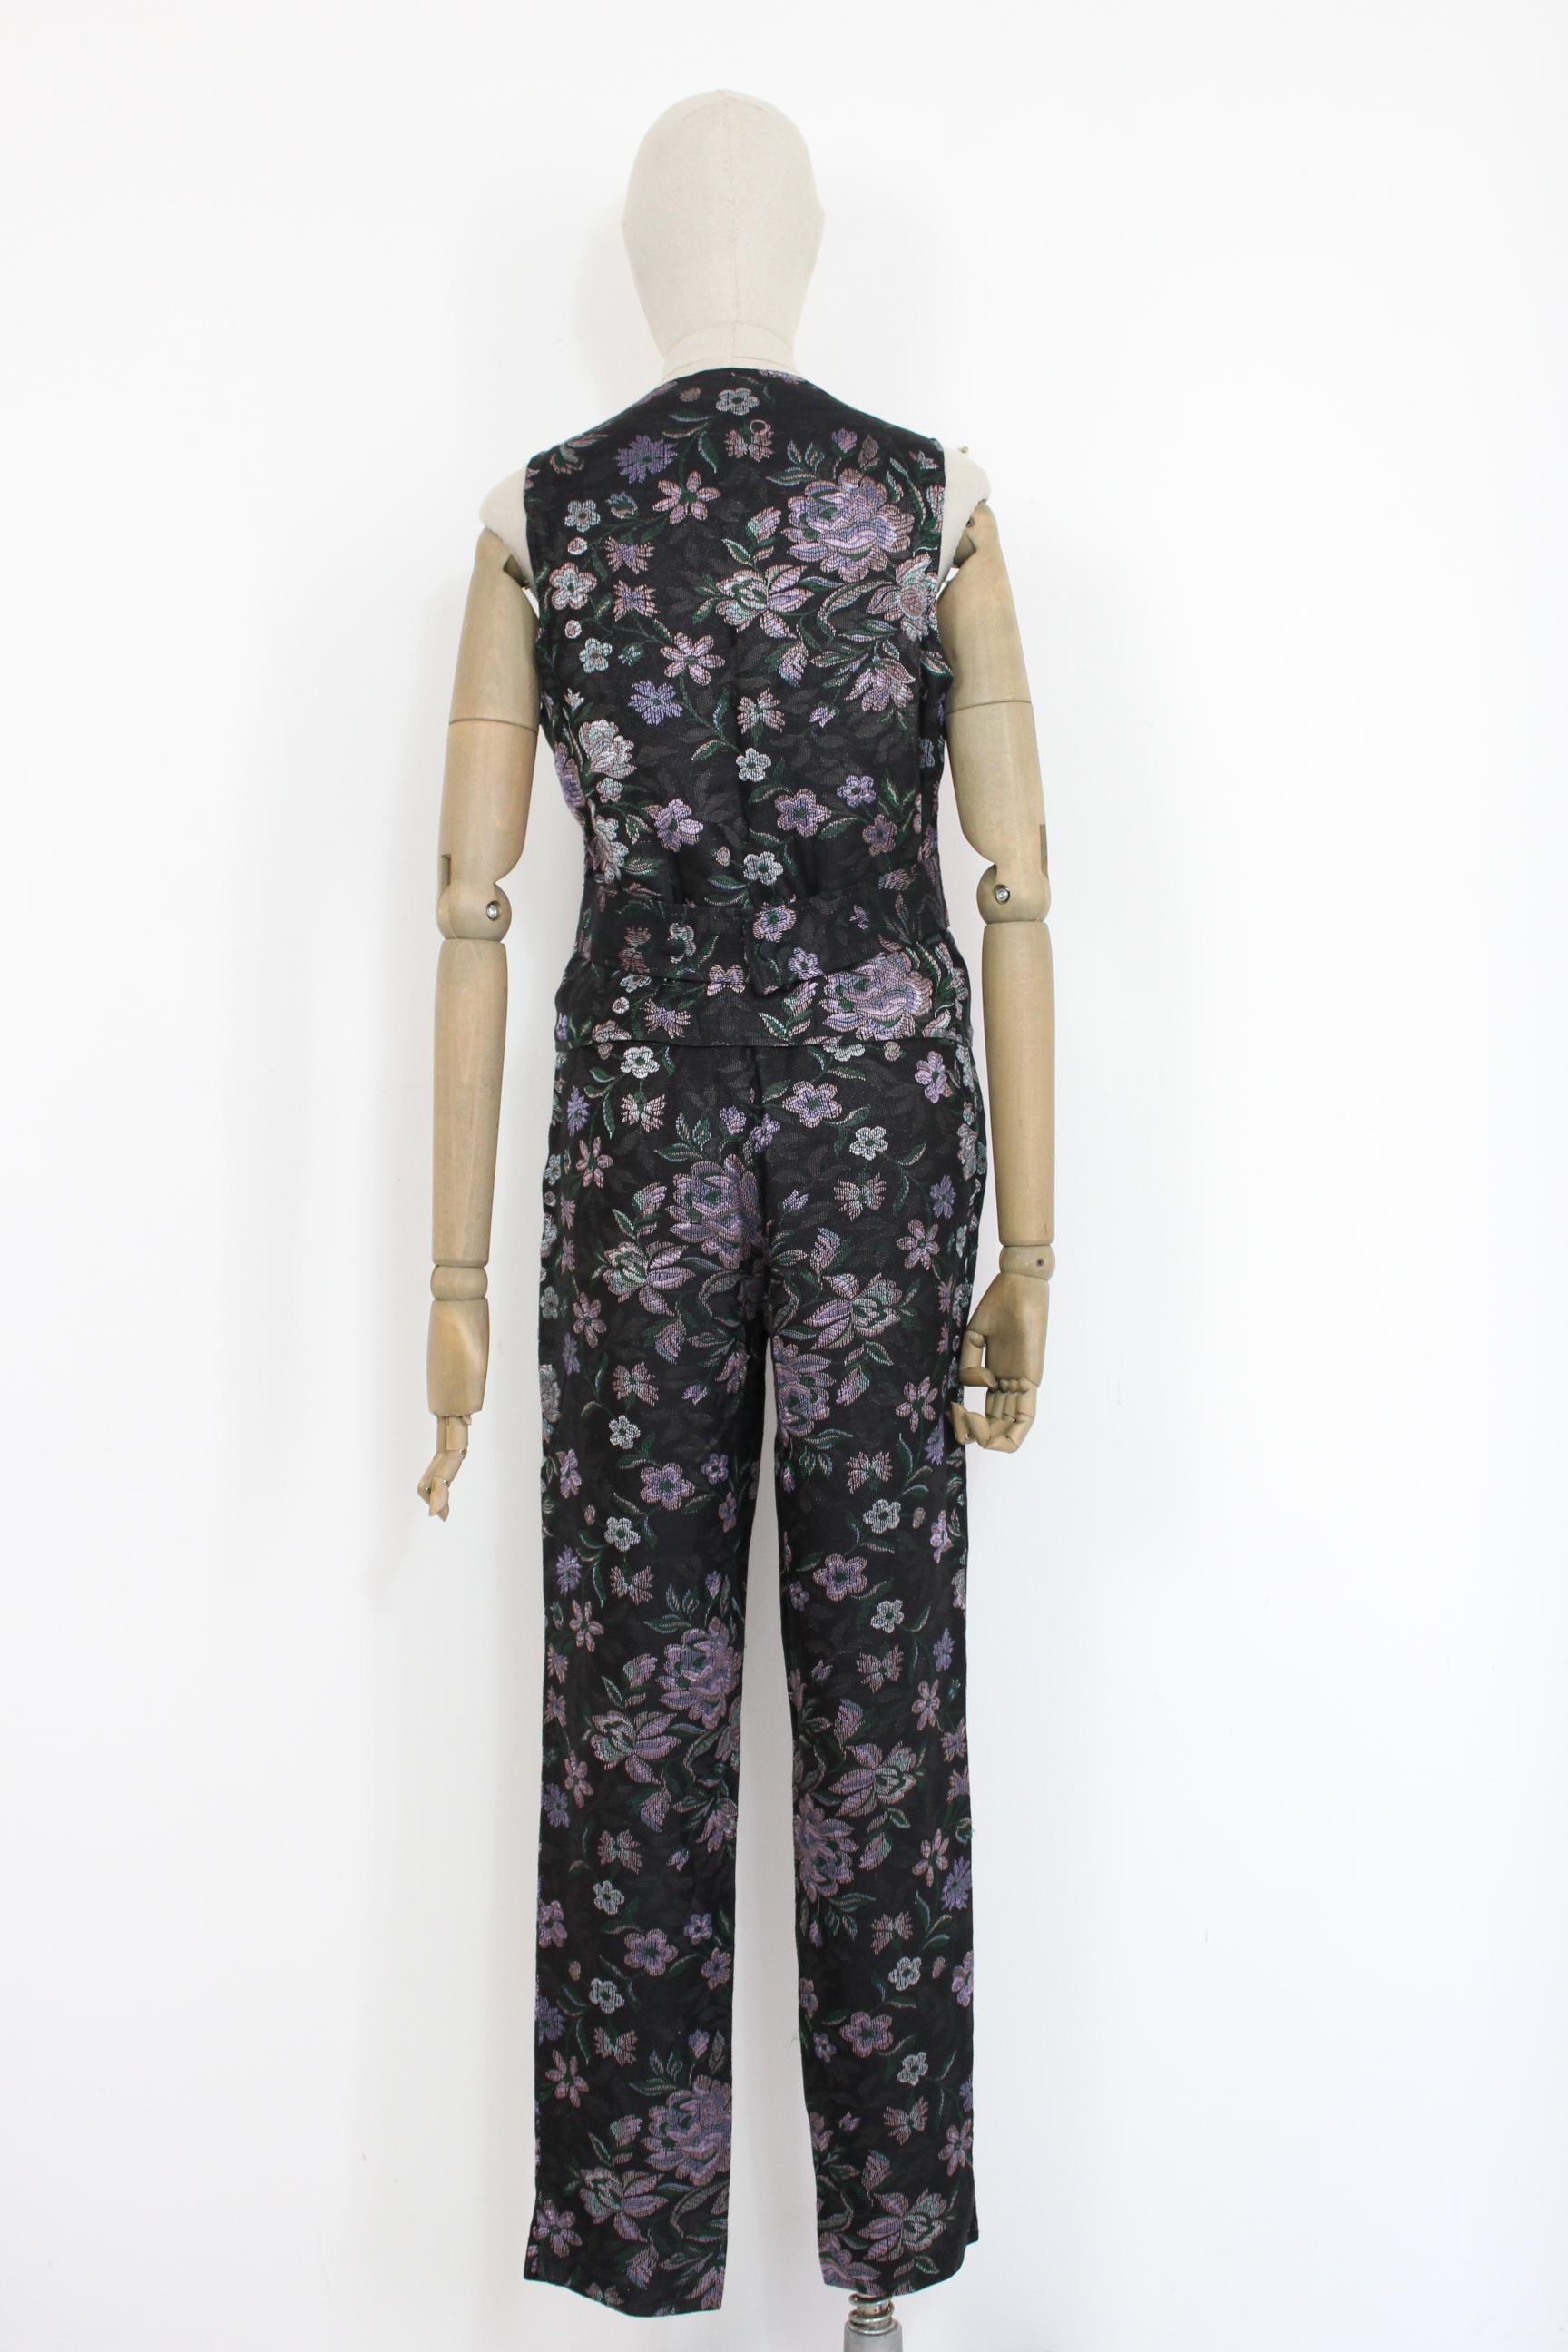 Emporio Armani 90s vintage women's suit pants. Vest and trousers, black with pink and green flowers, damask type fabric, 50% cotton 50% acetate. High waist trousers, narrow ankle model. Made in Italy. Excellent vintage conditions.



Size: 44 It 10